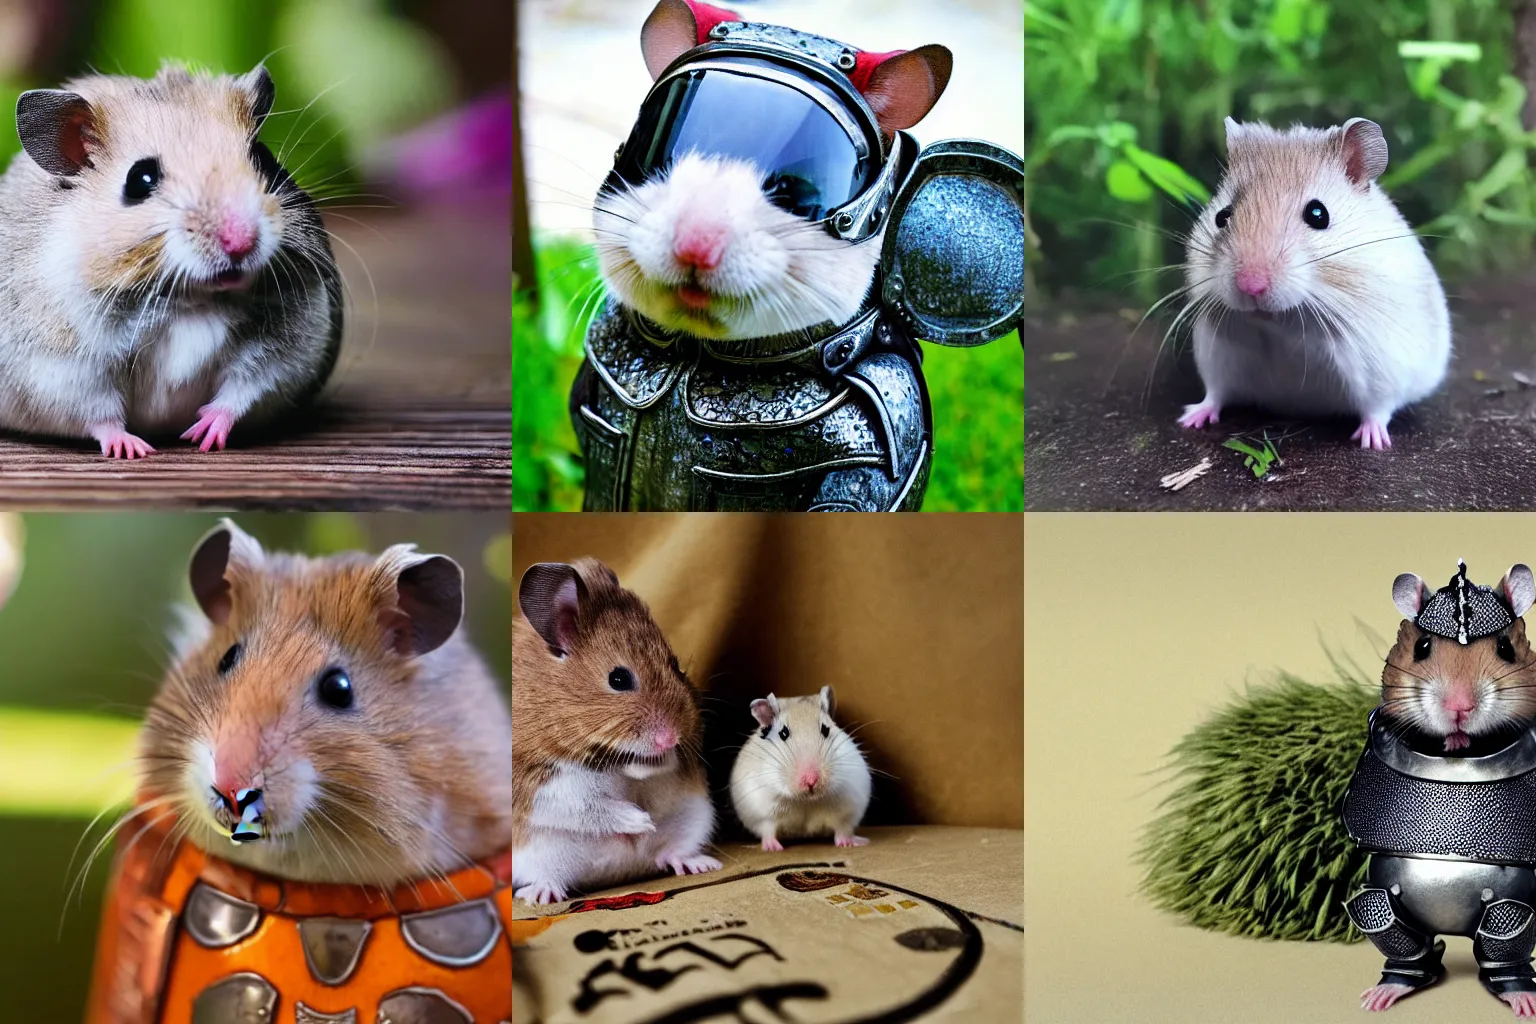 Prompt: photo of a hamster wearing knight armor, details visible